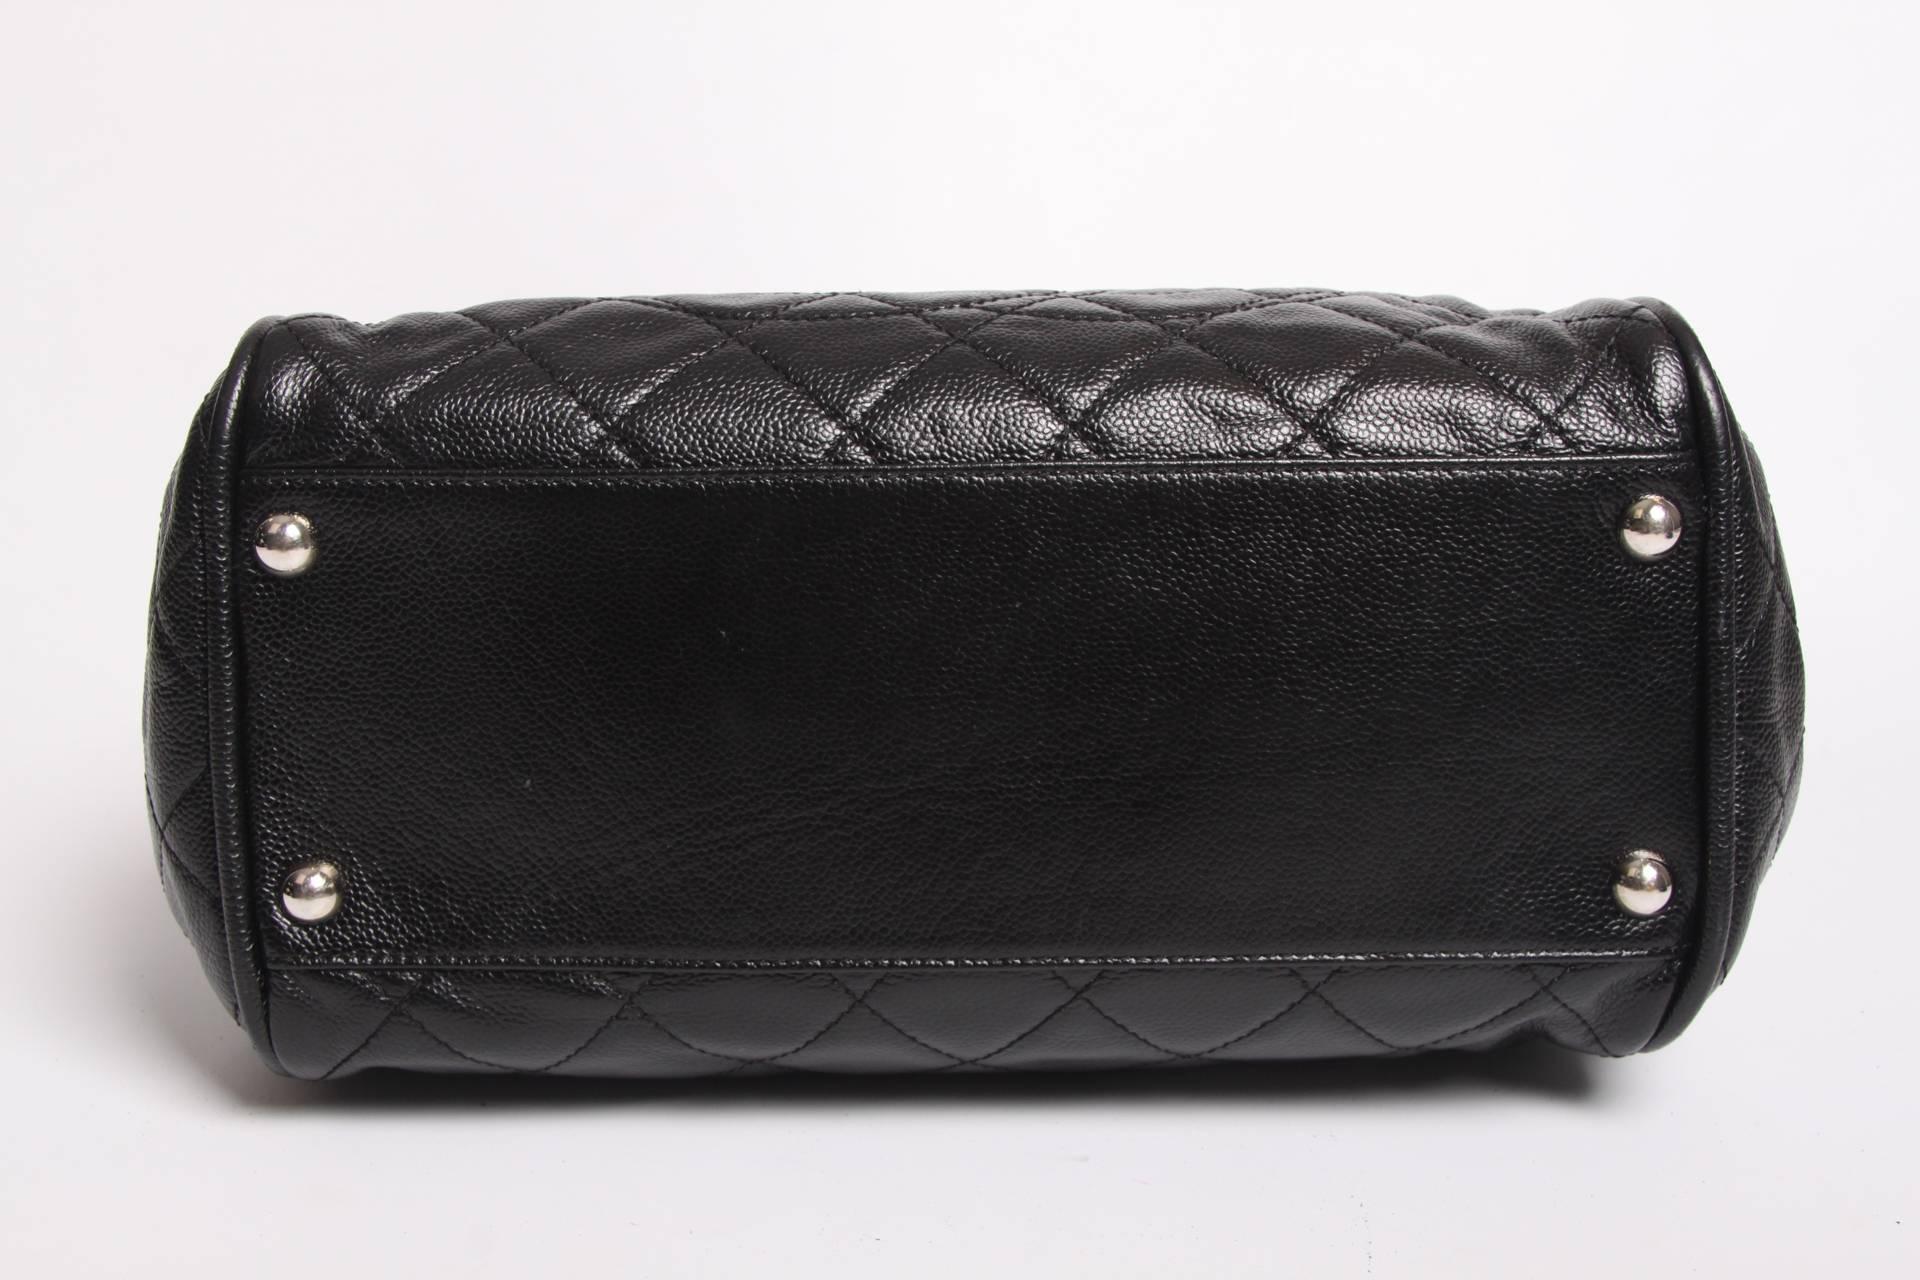 Chanel shopper in a rather large size, crafted in black caviar leather with silver-tone hardware. 

This bag is fully quilted and has a 2-way zipper on top for closures. At the front a large stitched interlocking CC logo. Two supple handles that